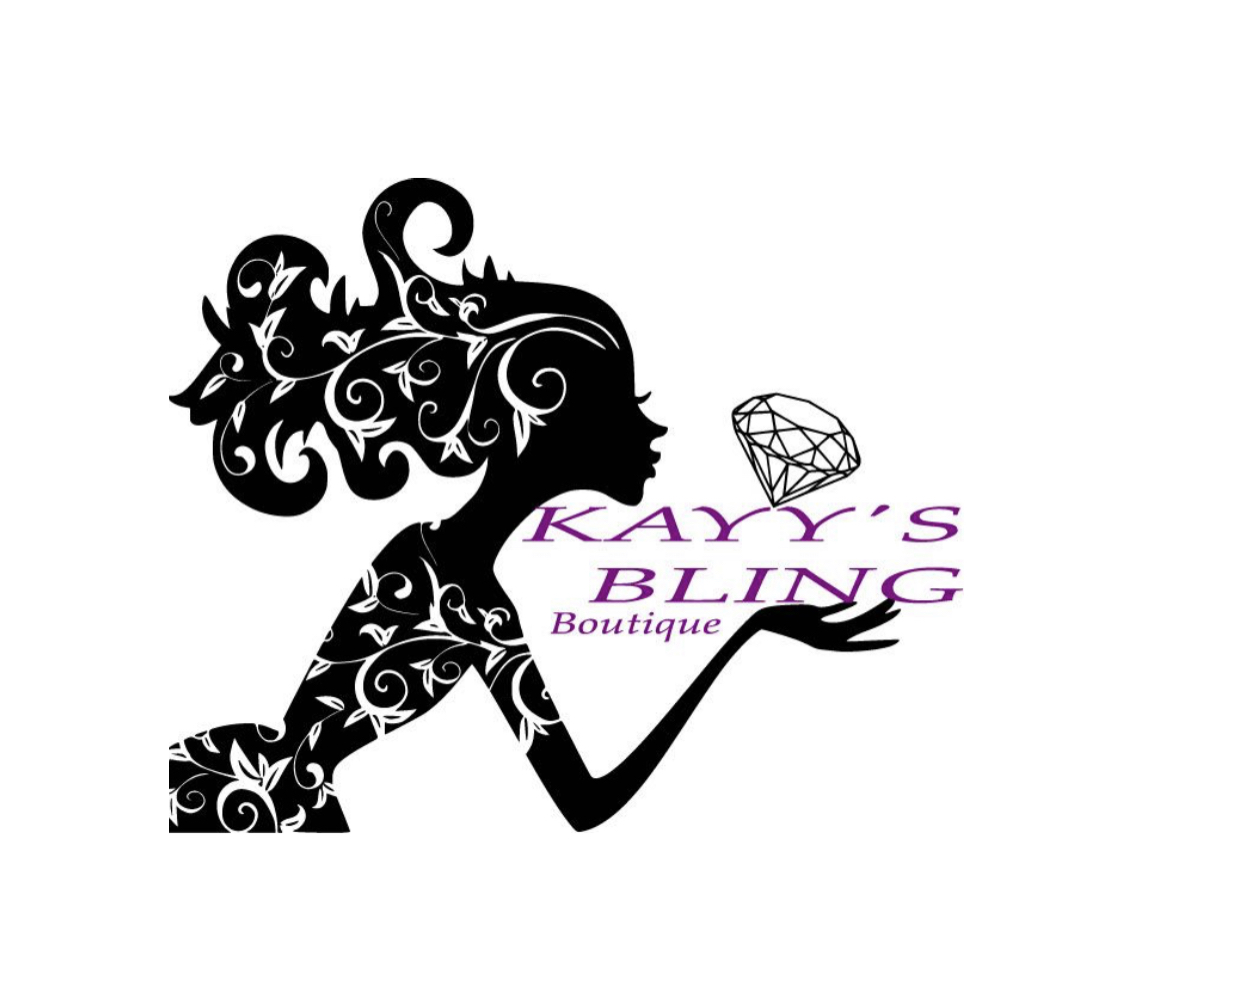 Kayy’s Bling Boutique